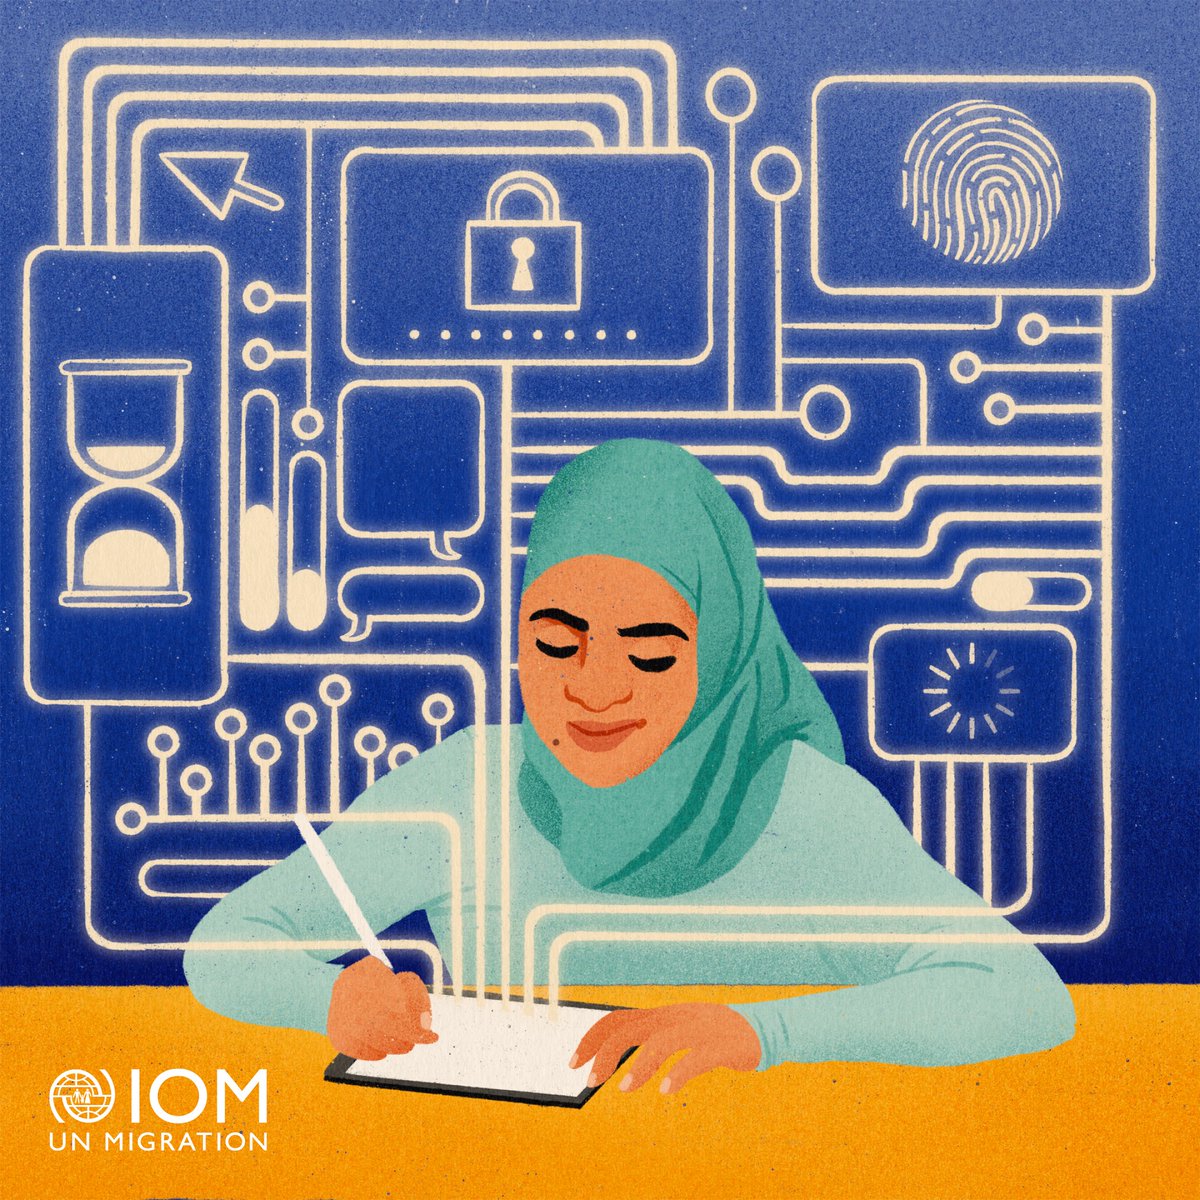 Migrant women and girls are breaking stereotypes, creating innovative solutions, and improving communities. Let us celebrate #GirlsinICT!